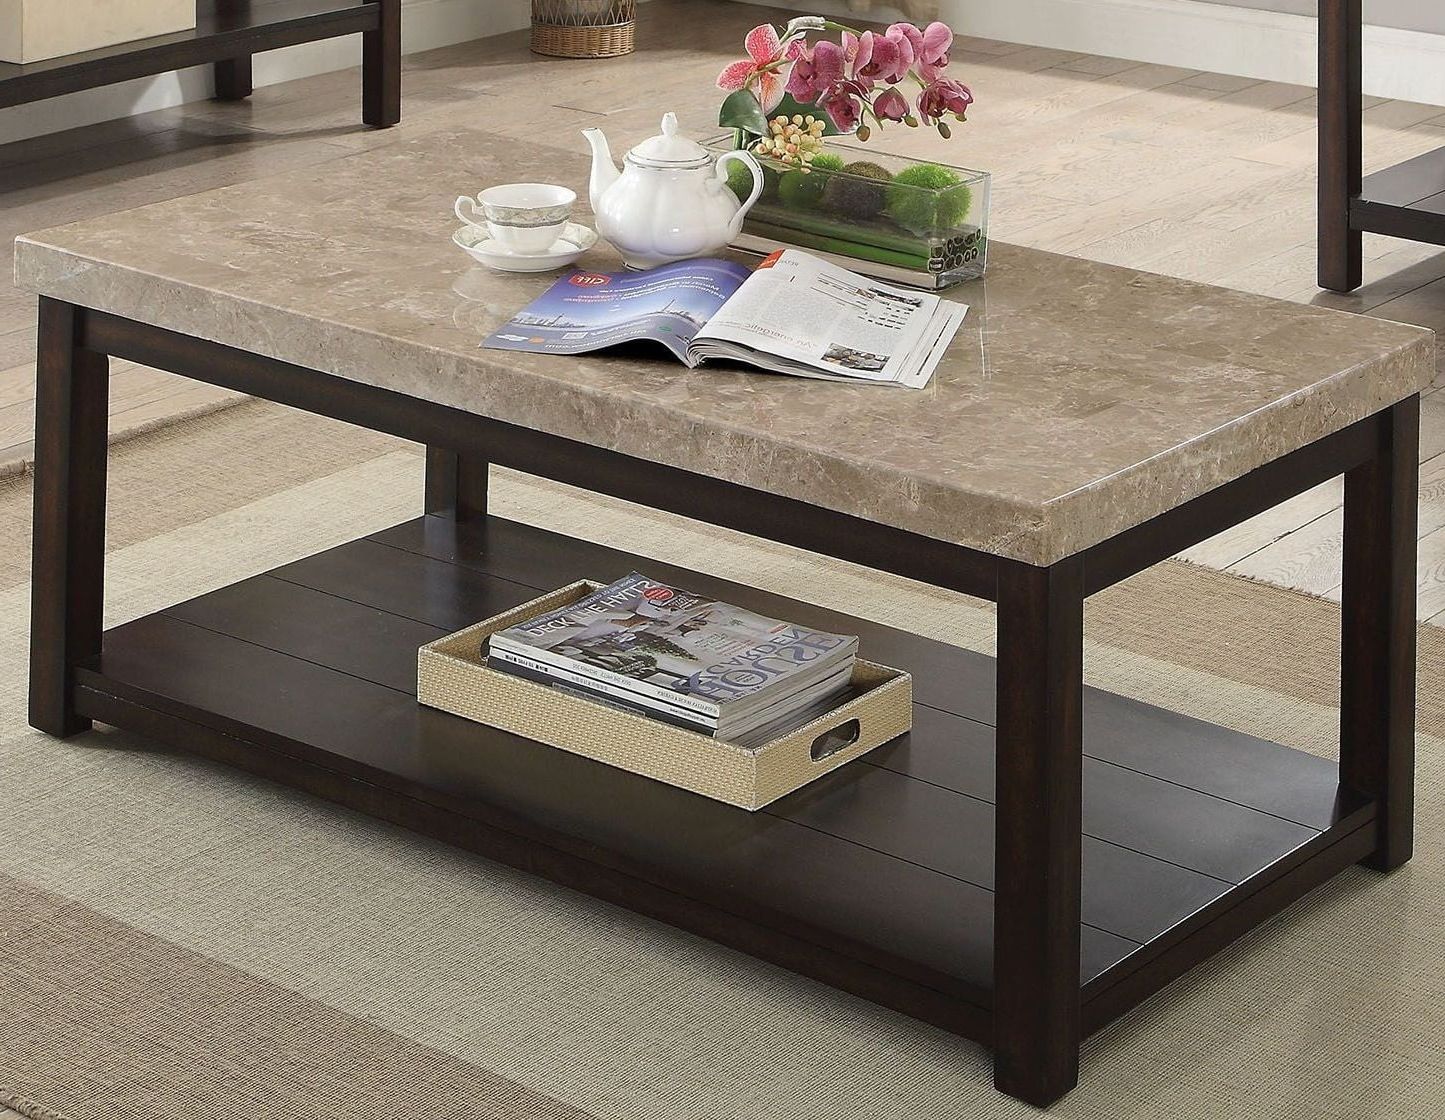 Calgary Dark Walnut Coffee Table From Furniture Of America Pertaining To Best And Newest Walnut Coffee Tables (View 2 of 20)